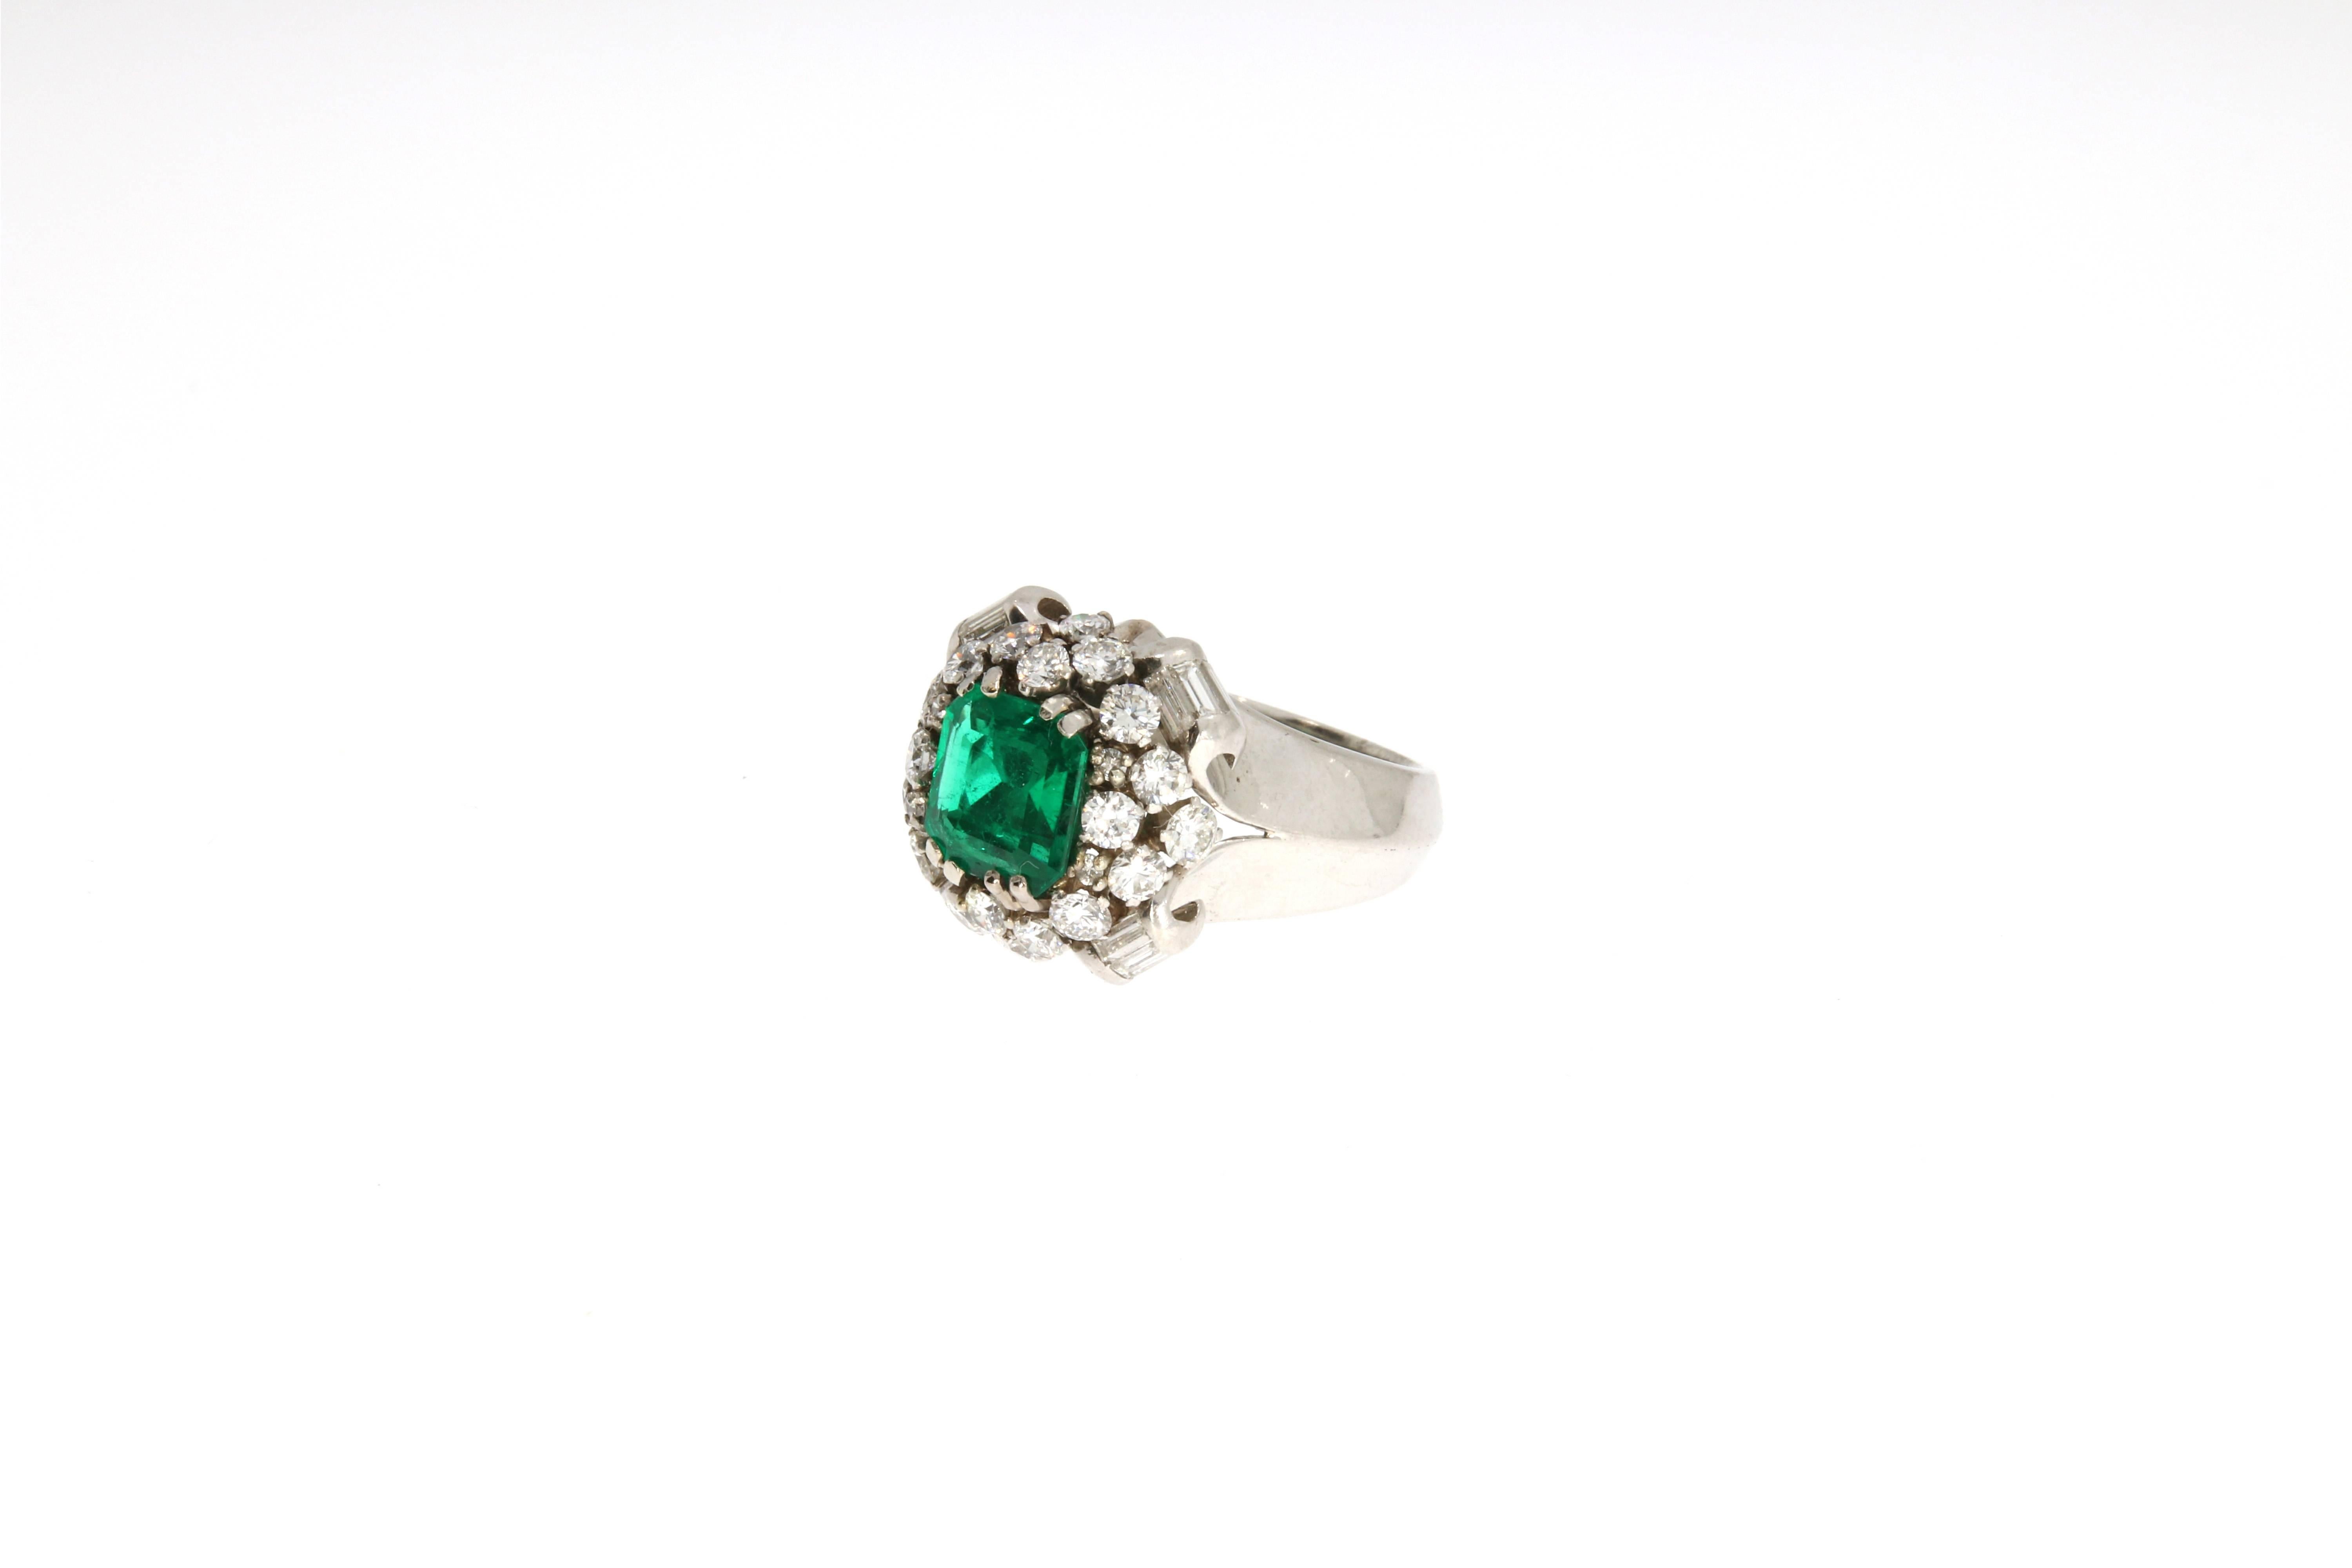 An impressive platinum cocktail ring. It is centered by a step- cut emerald (no oil) within a surround of 24 brilliant cut diamonds (in total approx: 1.65 ct). The refined setting is accentuated by 12 baguette diamonds (in total approx: 0.5 ct)